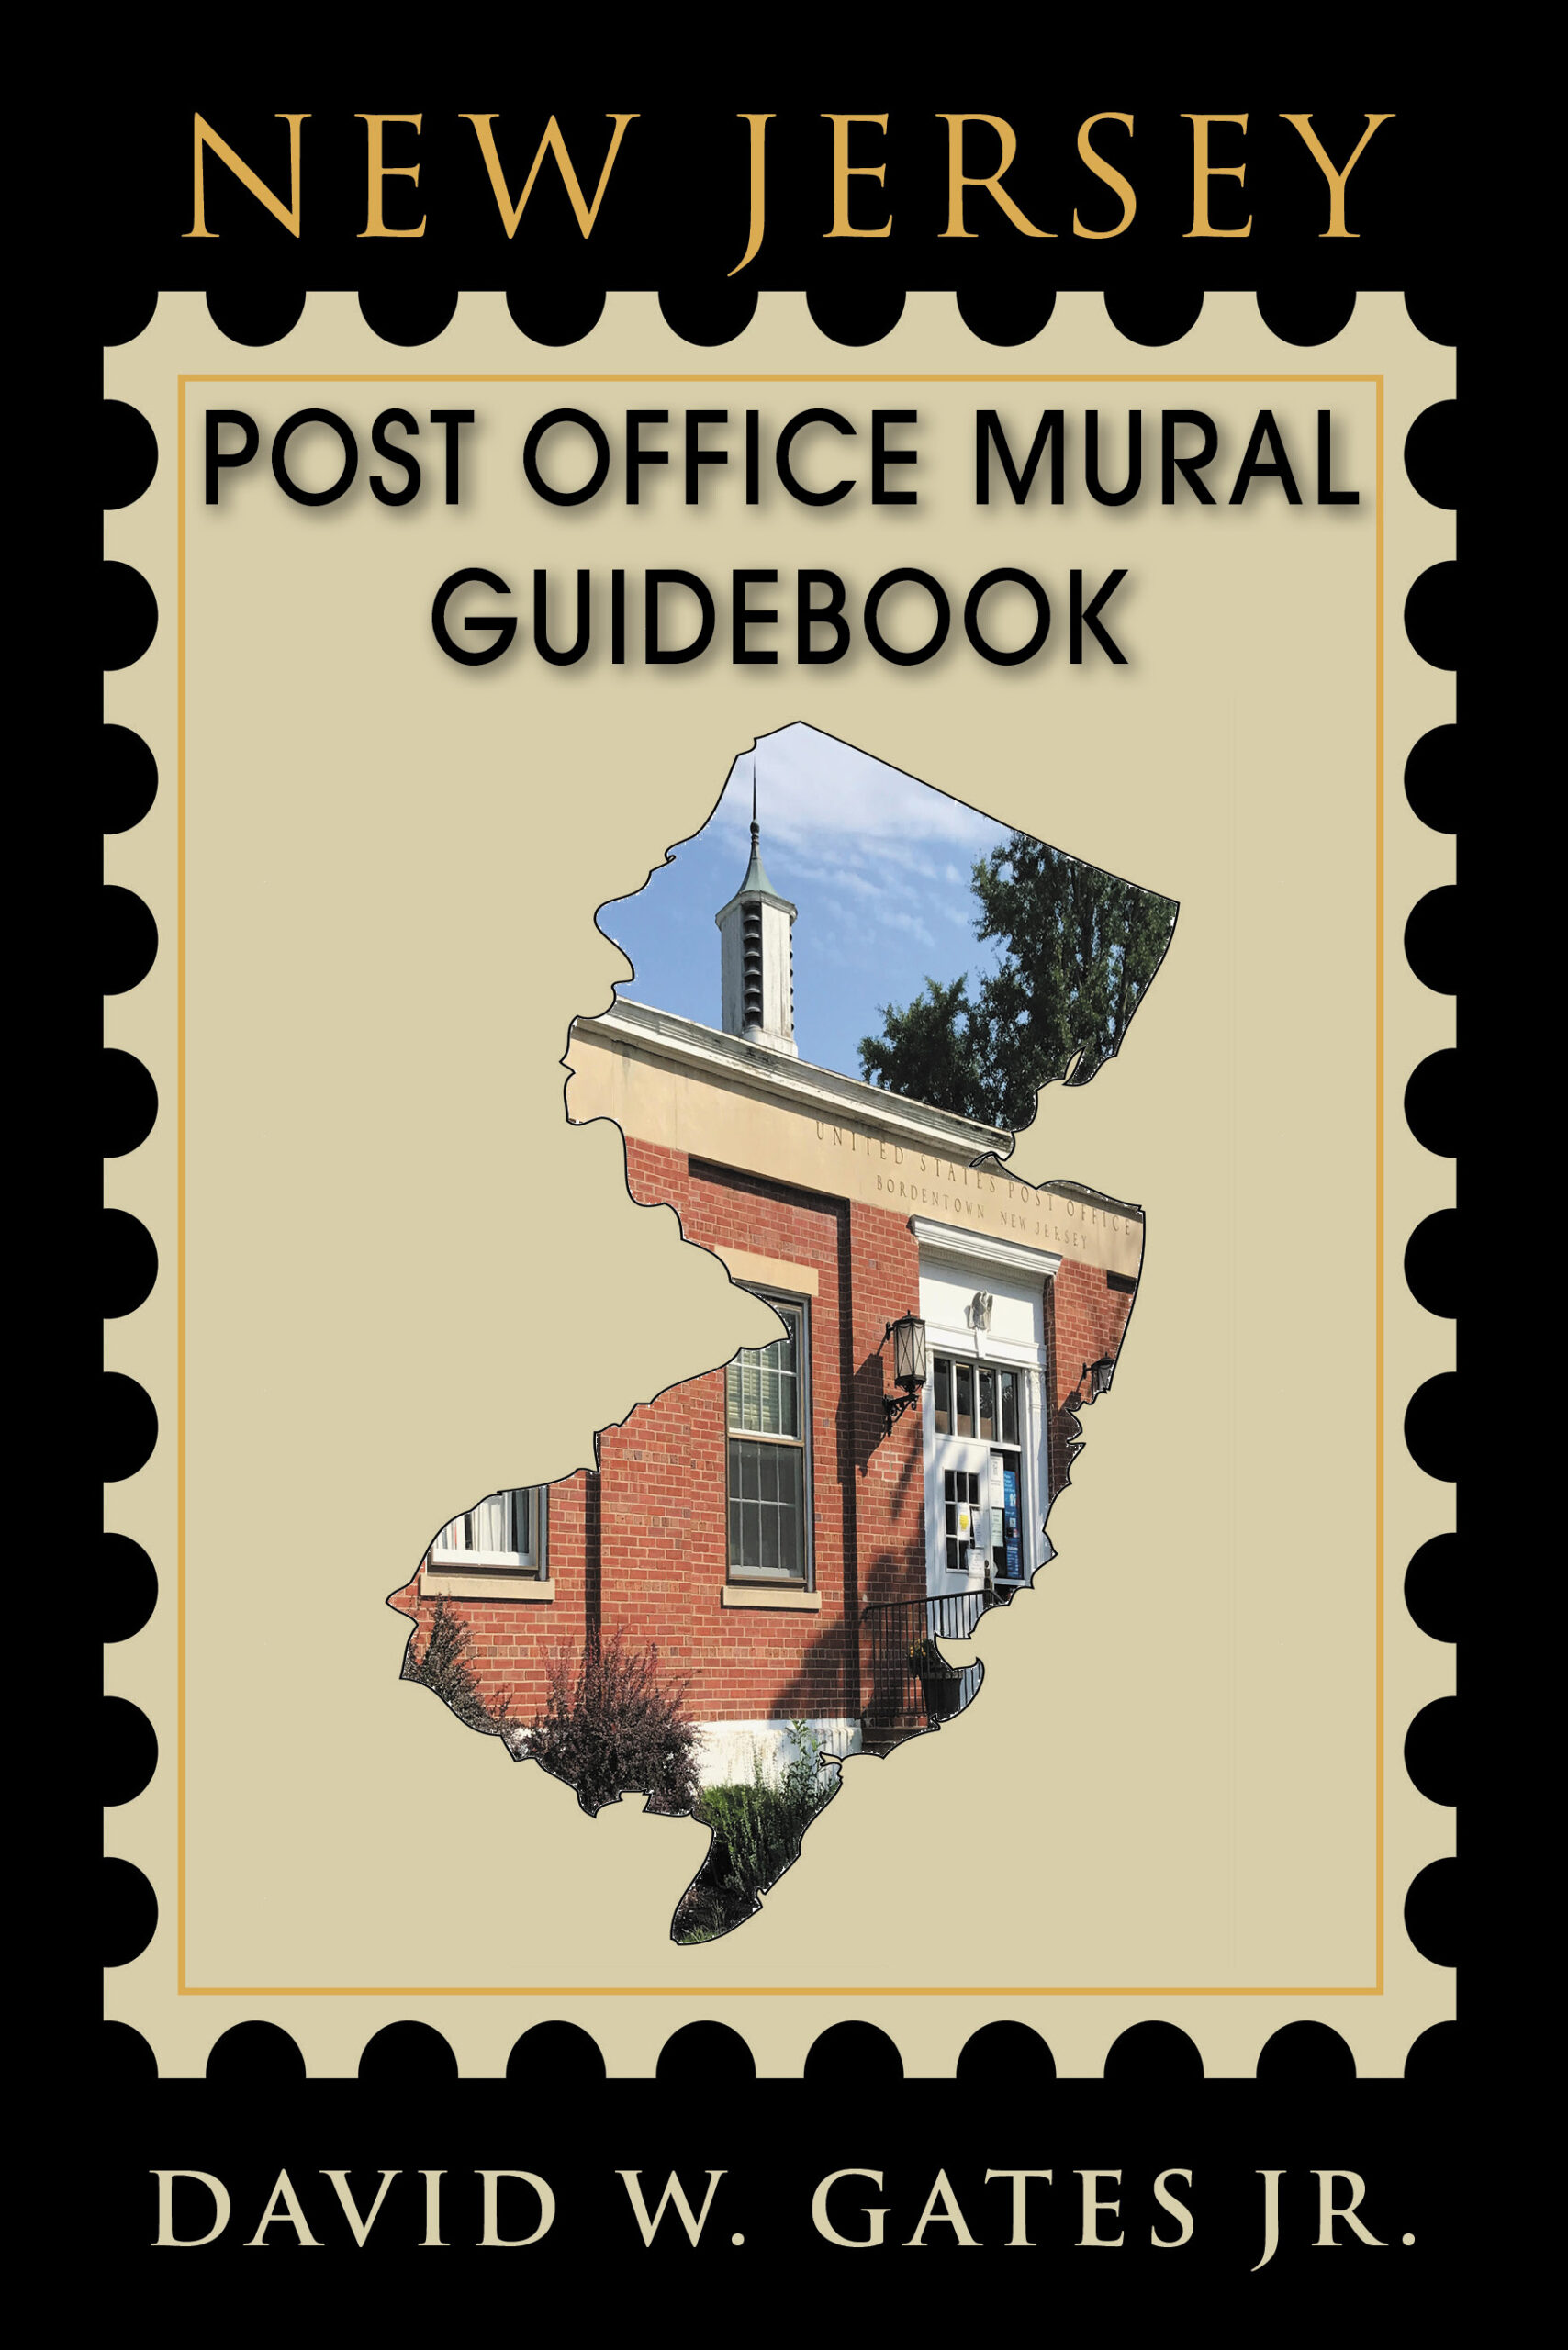 New Jersey Post Office Mural Guidebook